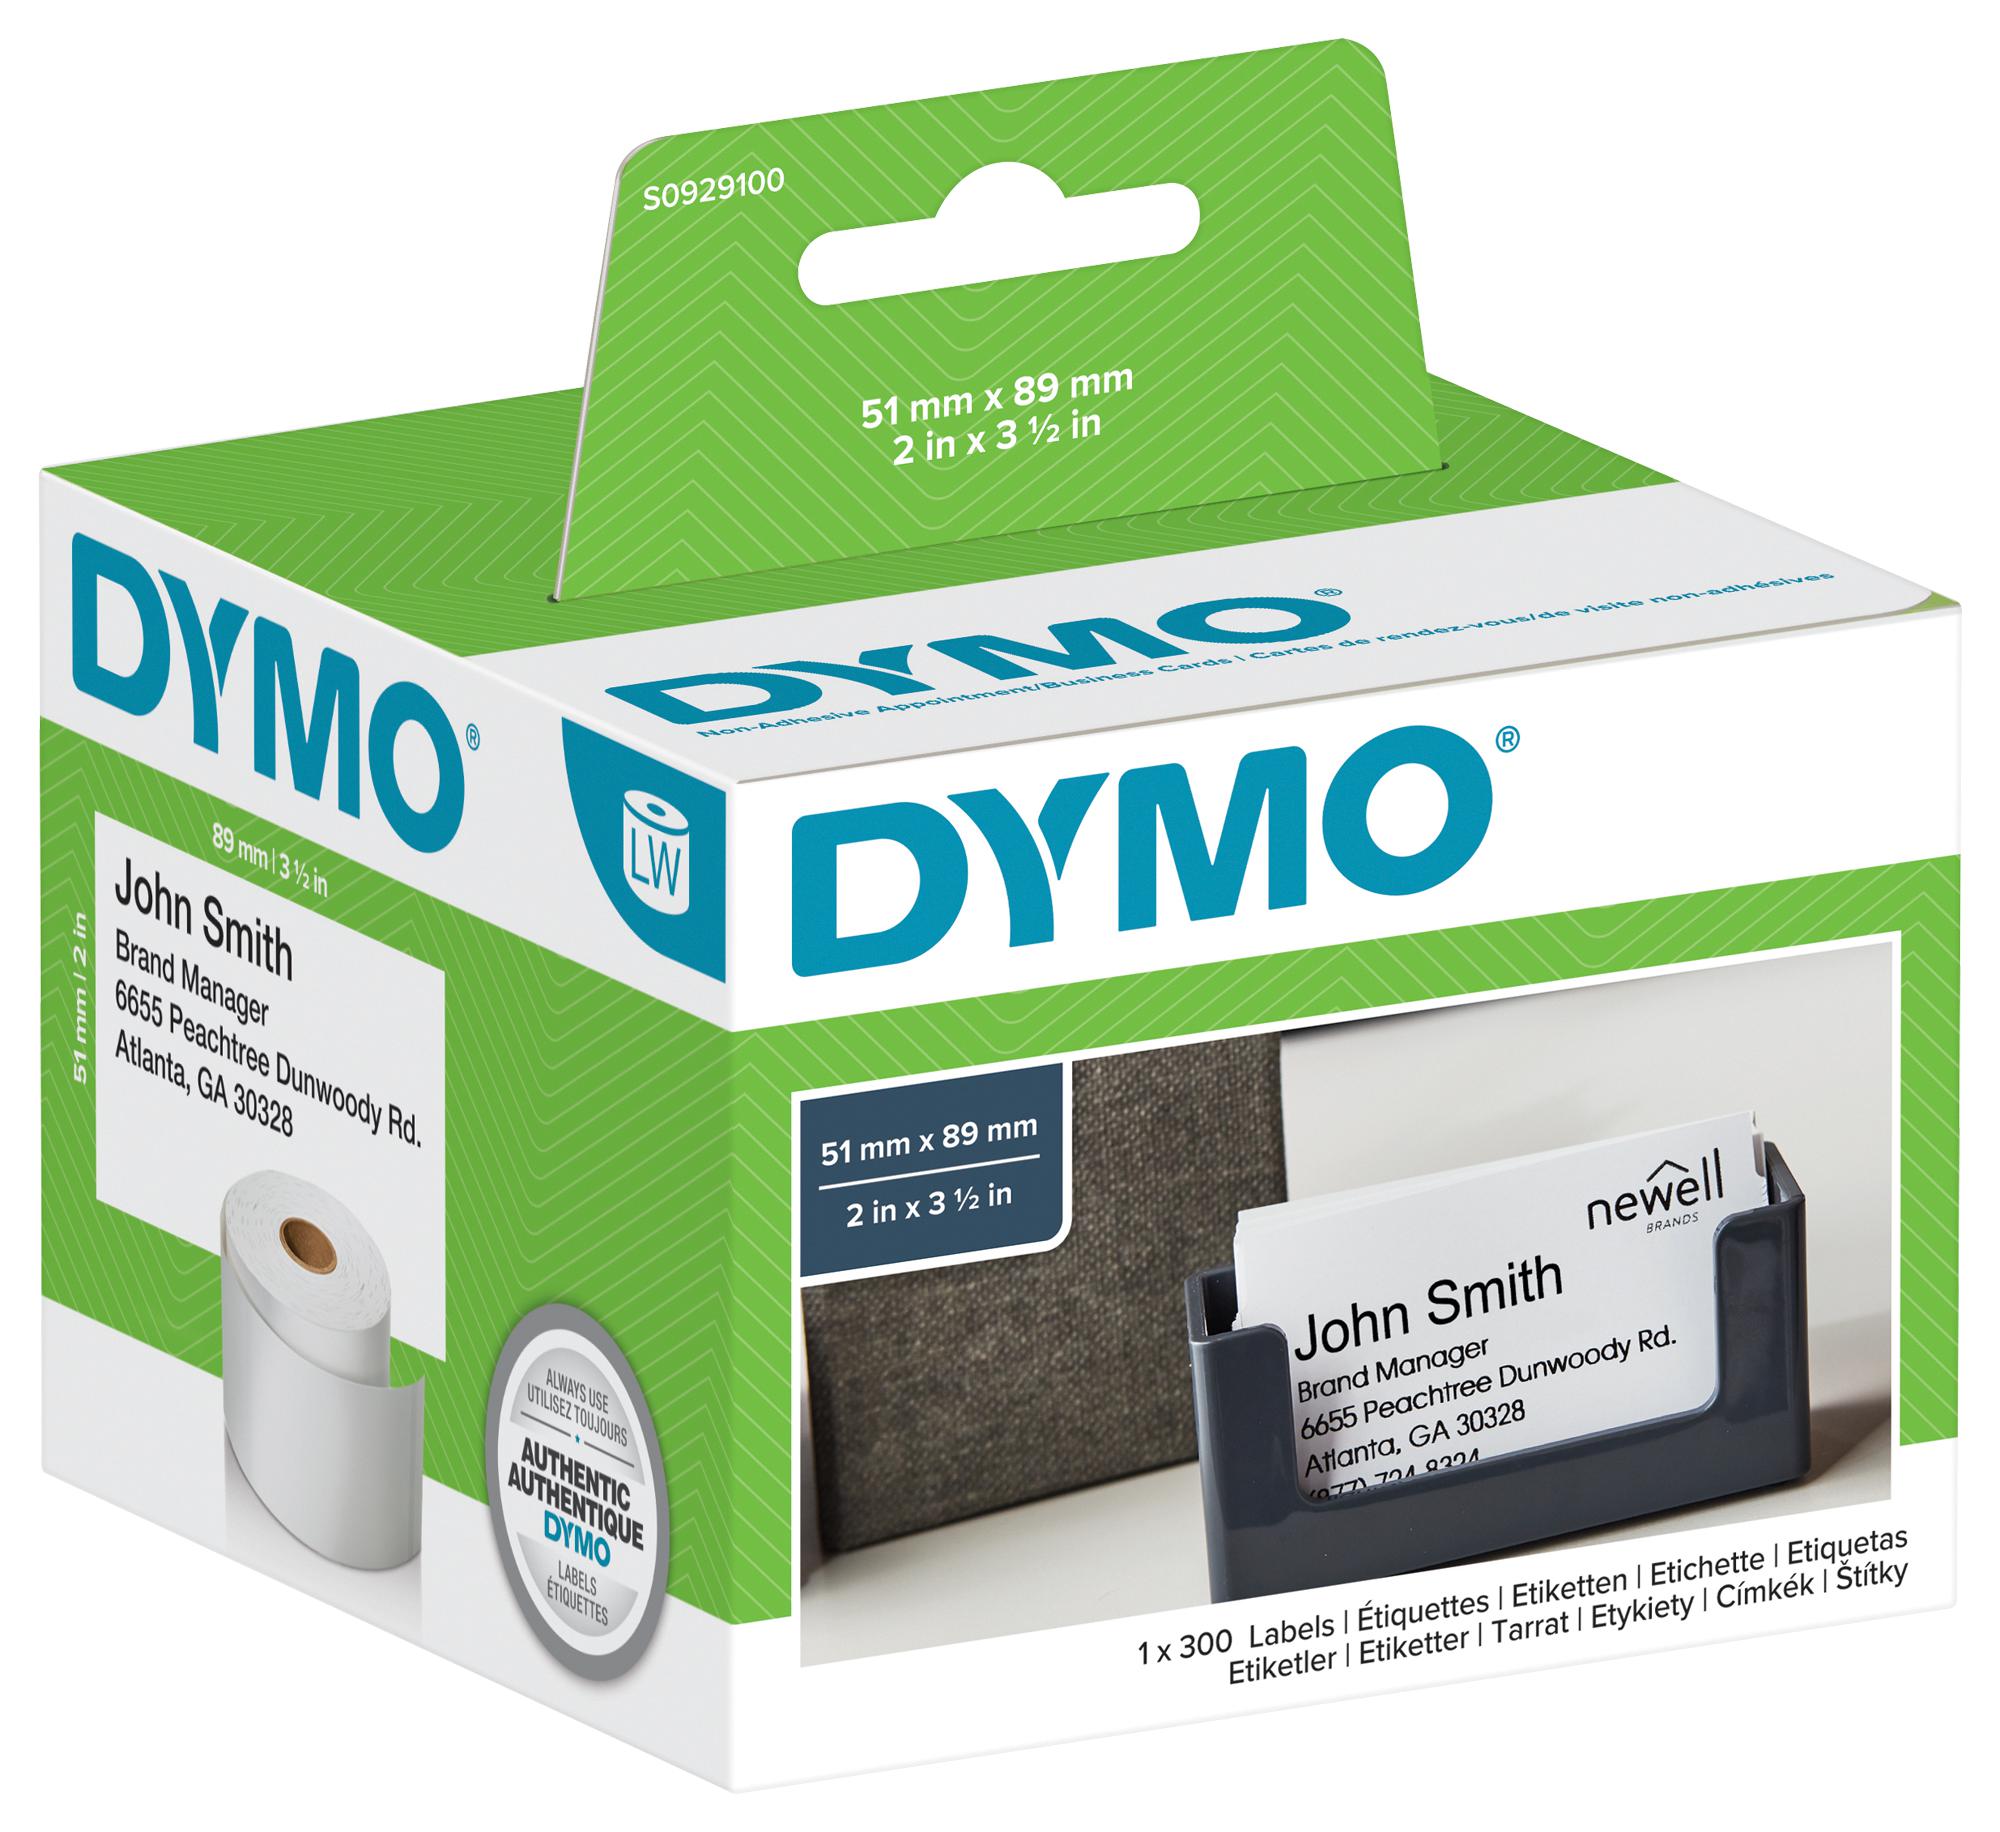 Dymo S0929100 Lw Appointment / Name Badge Cards